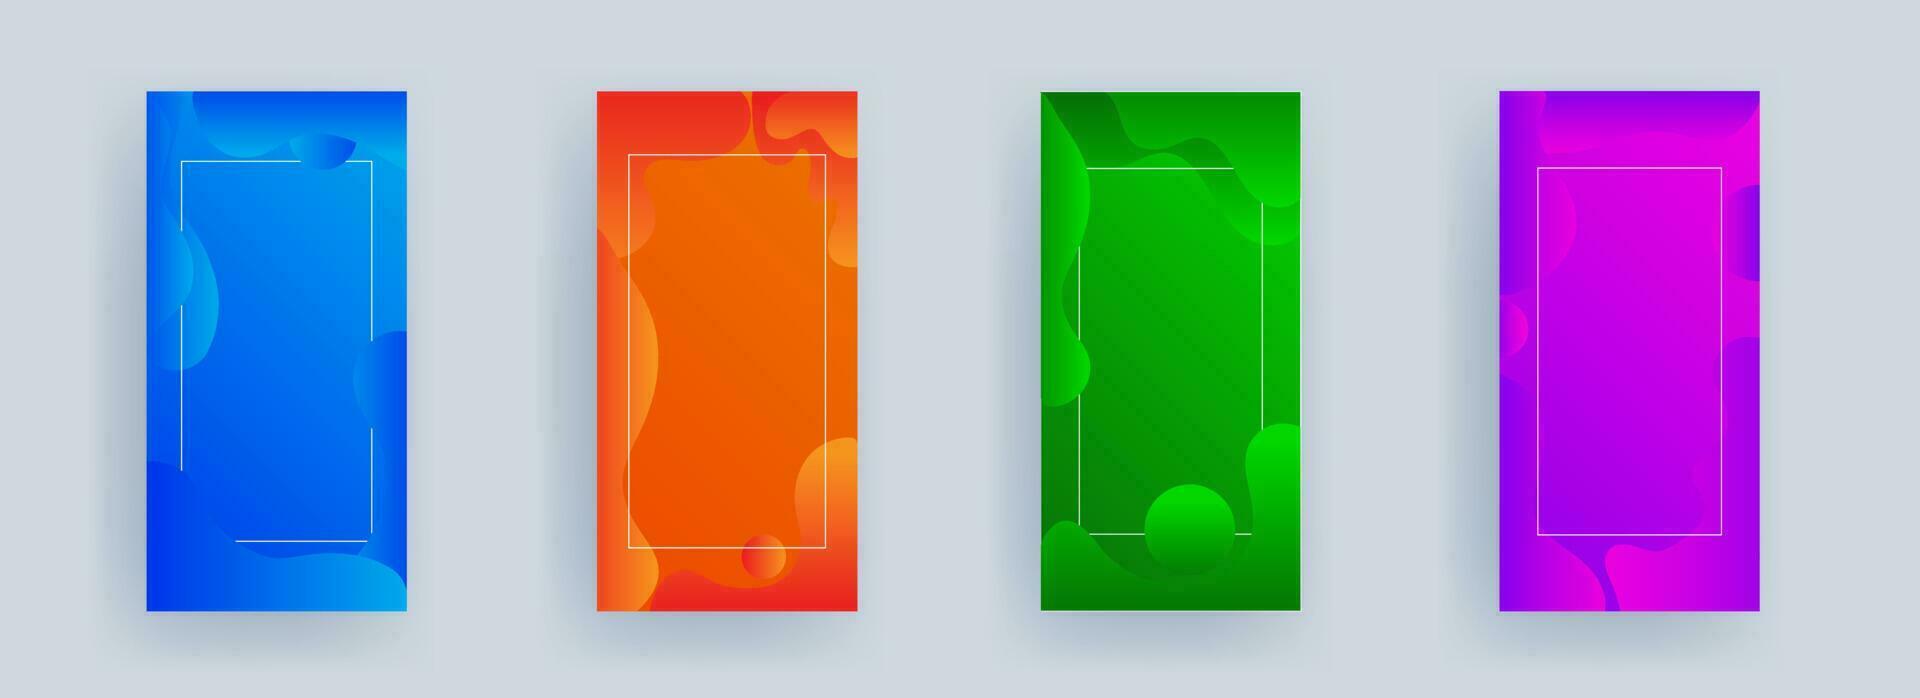 Advertising template or vertical banner design with fluid art abstract background in four color option. vector